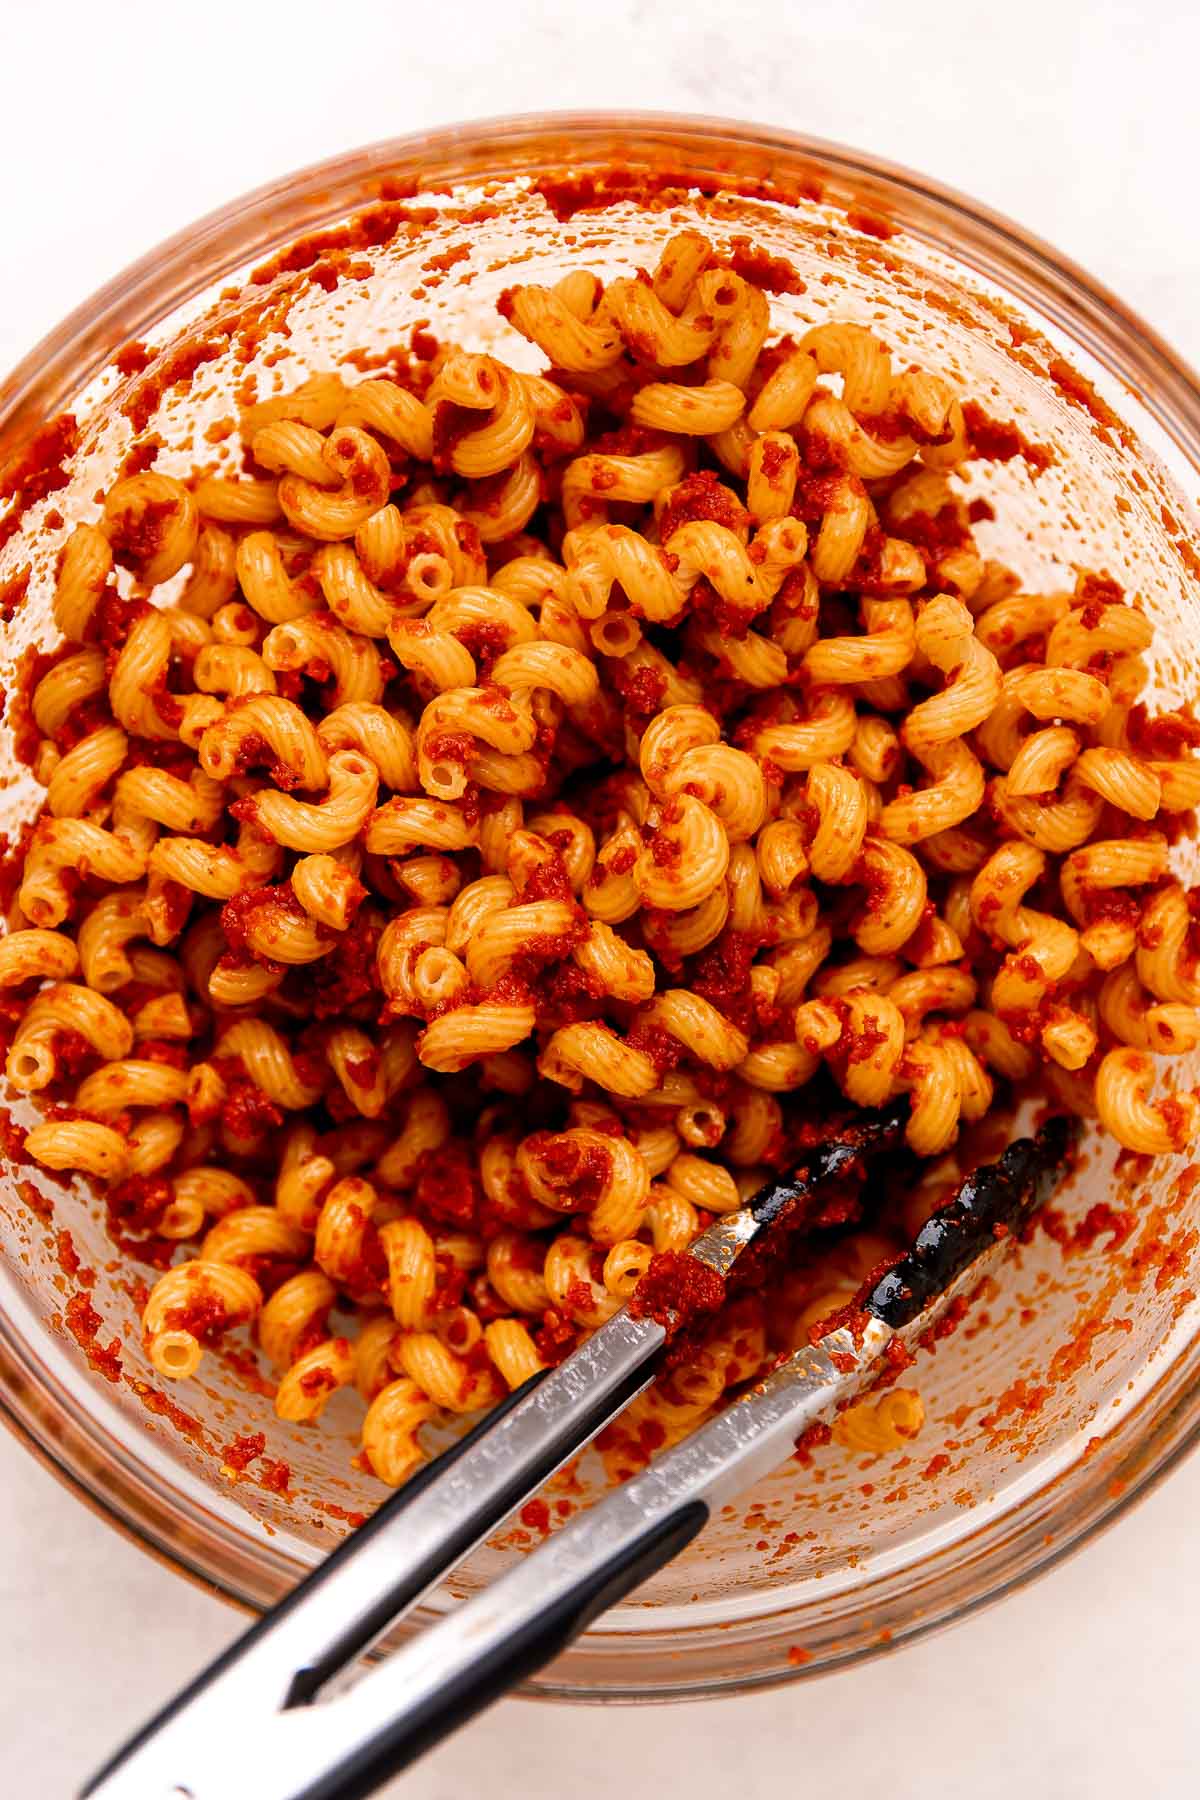 Cooked cavatappi pasta tossed with sundried tomato dressing rests inside of a clear glass mixing bowl to make pasta salad with sundried tomatoes. The bowl sits atop a creamy white textured surface. A pair of tongs rests inside of the bowl.